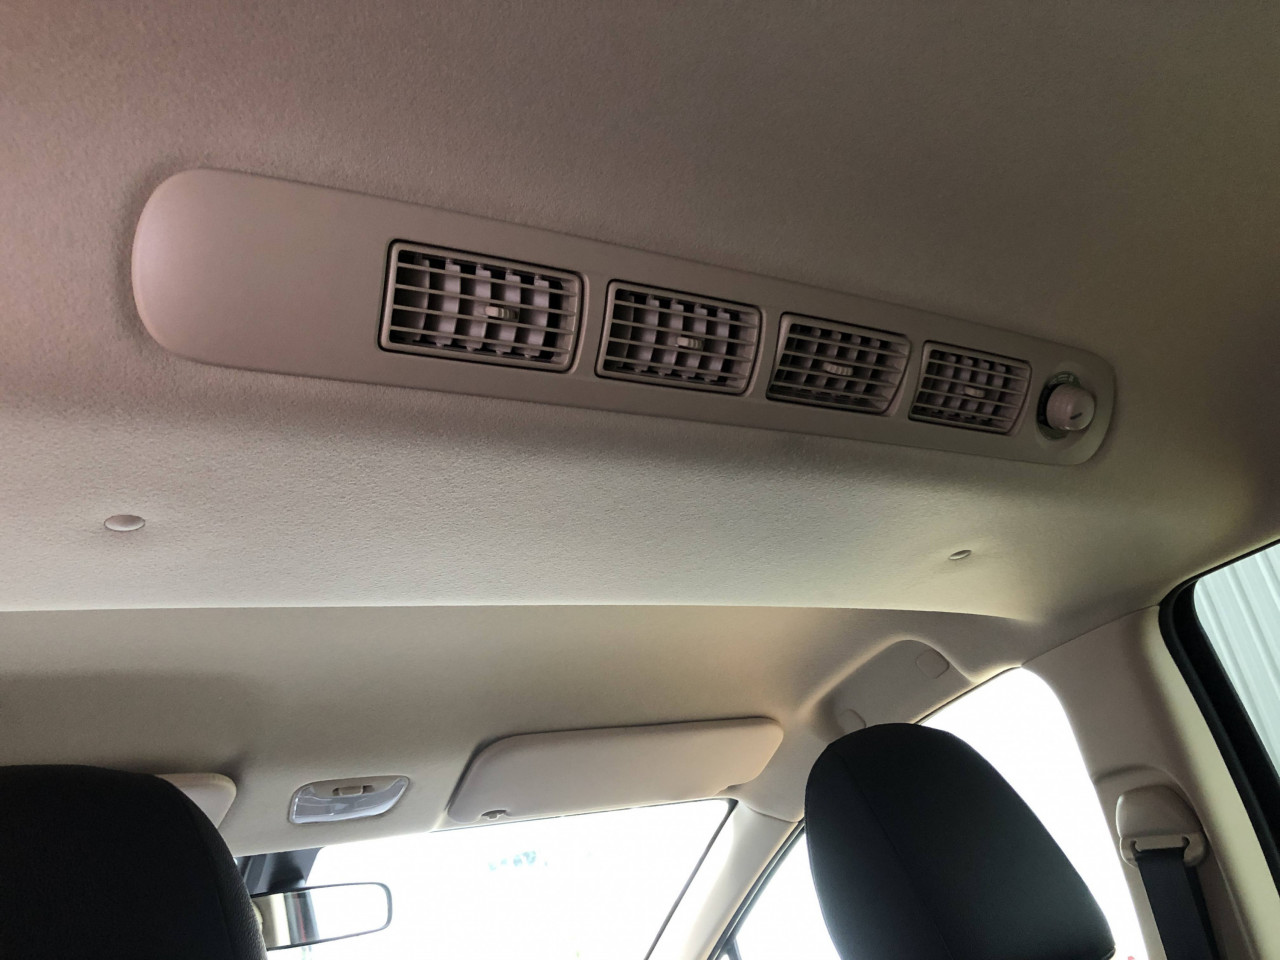 The Xpander also comes with four roof-mounted air vents for better air distribution towards each passenger. - Pic courtesy of Daniel Fernandez